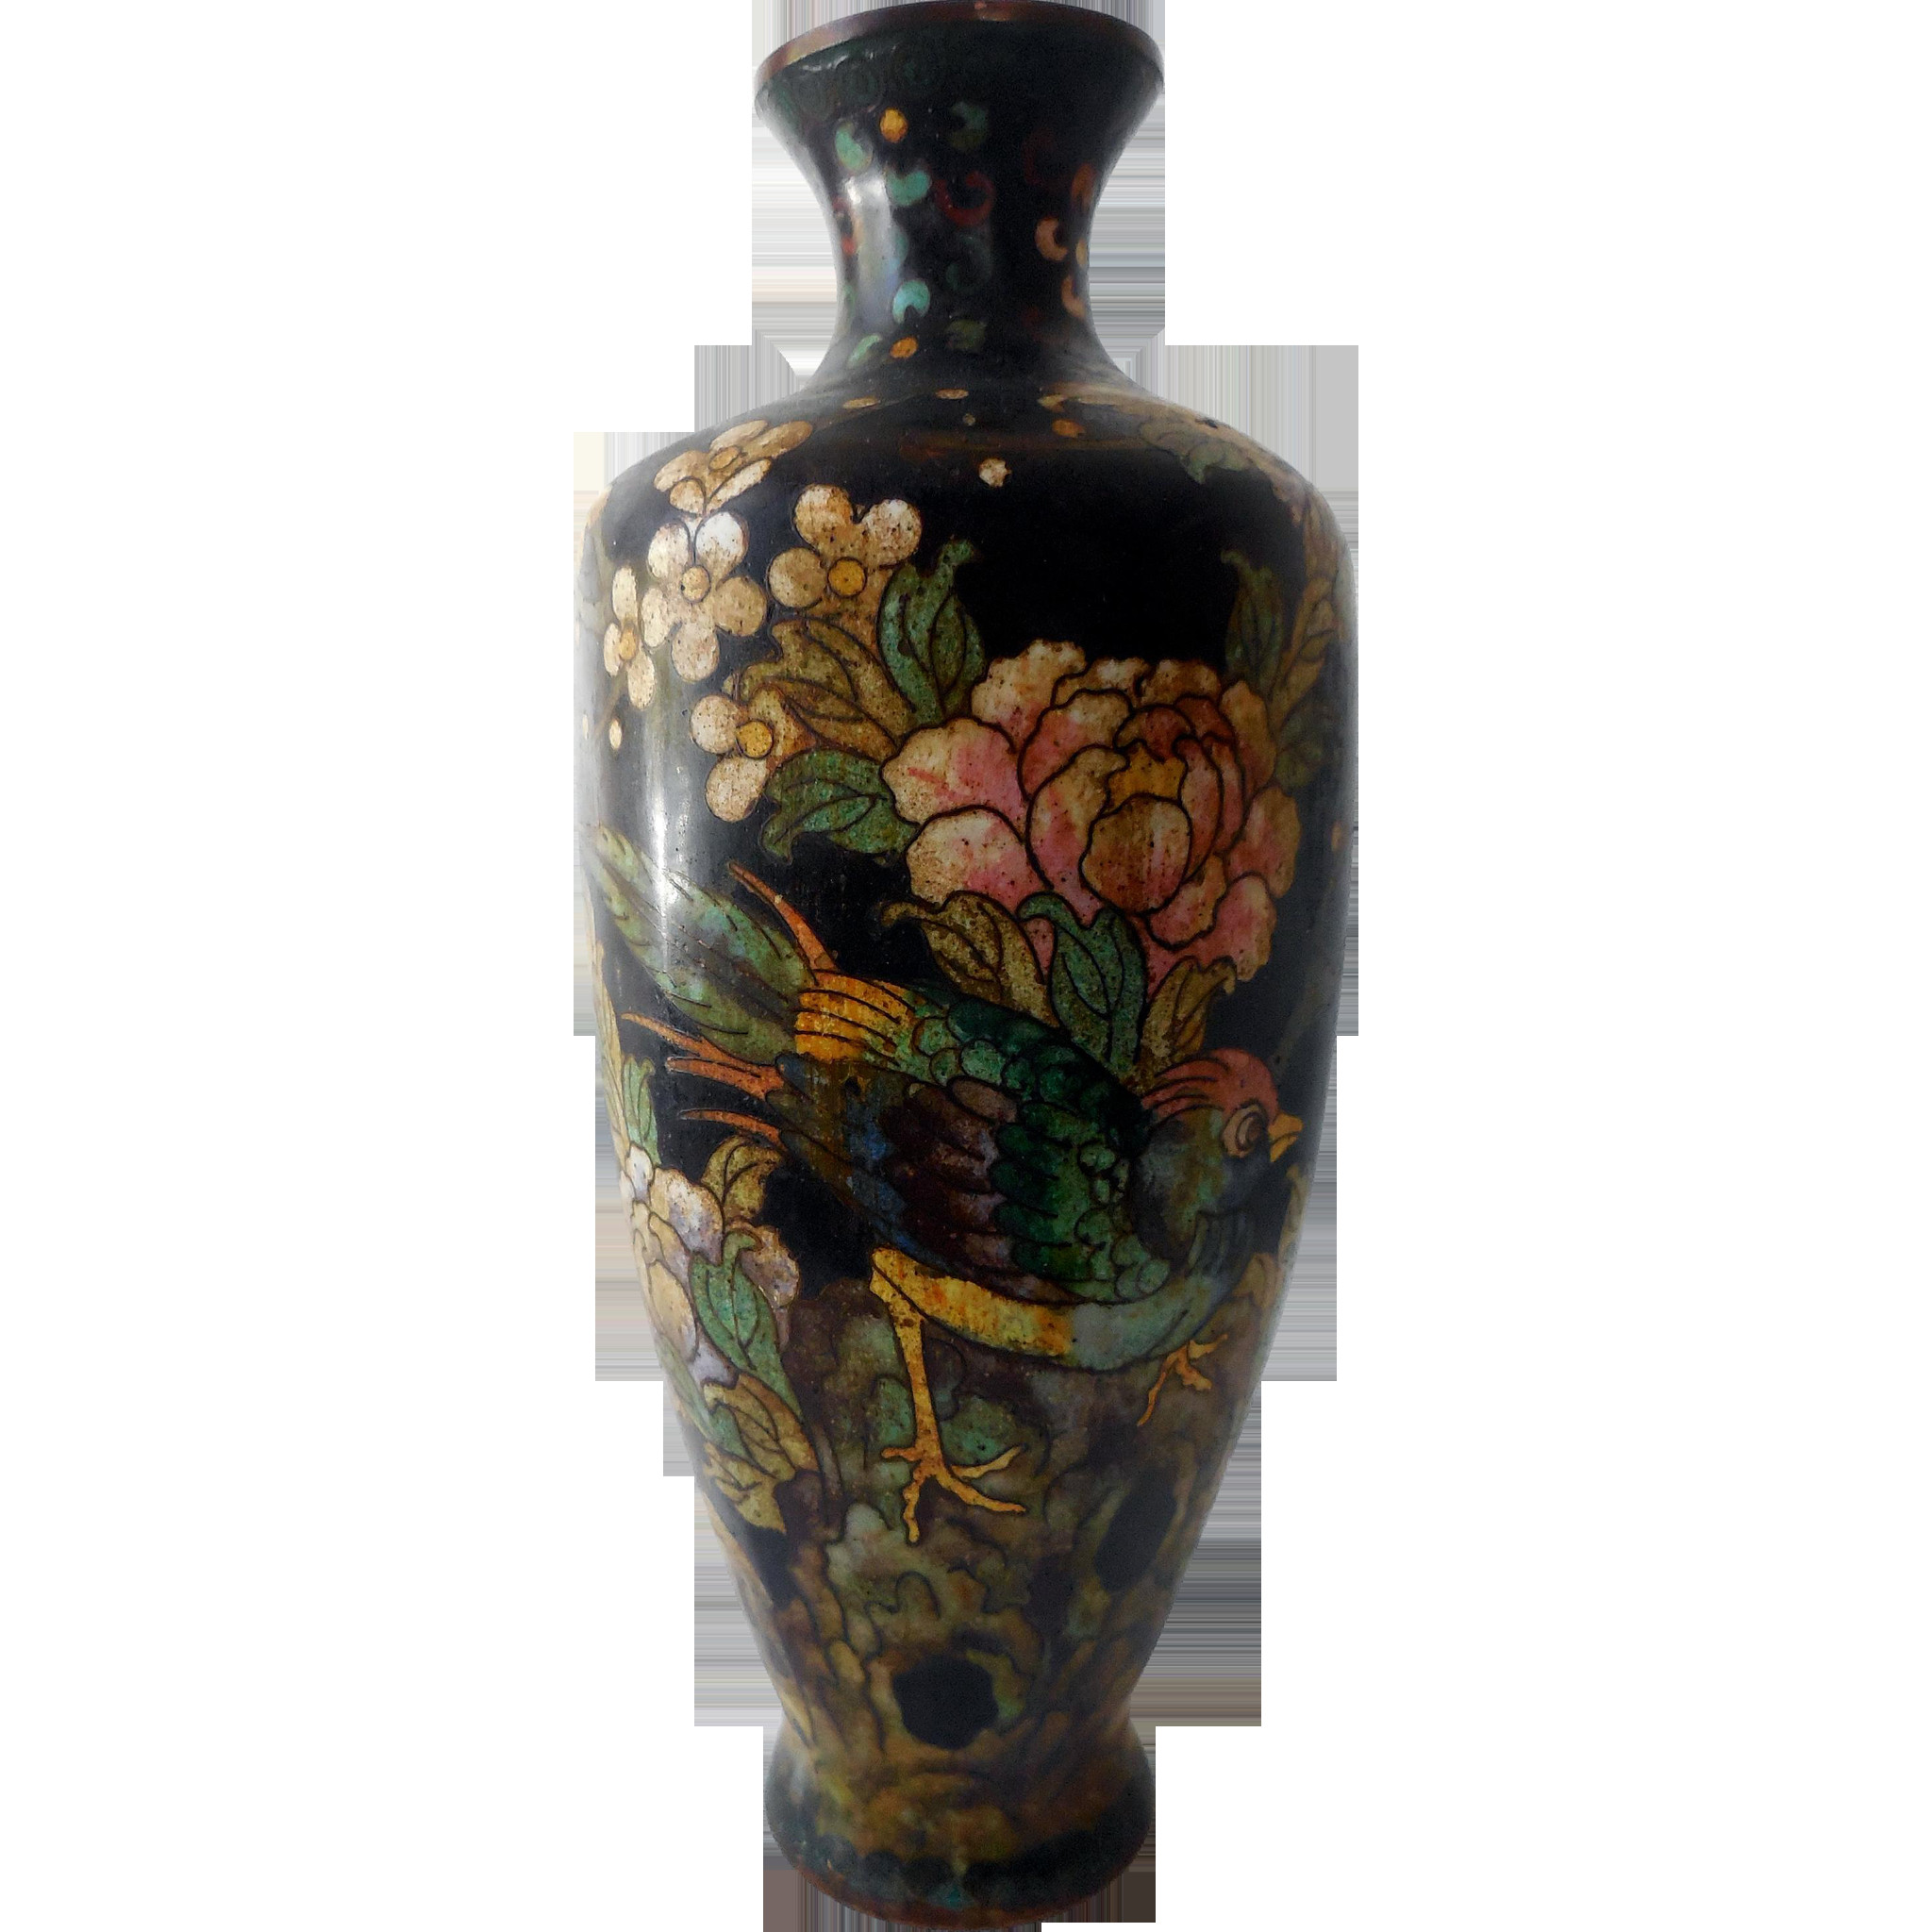 12 Popular Old Vases for Sale 2024 free download old vases for sale of antique chinese cloisonne vase 19th c great ming mark japanese pertaining to antique chinese cloisonne vase 19th c great ming mark